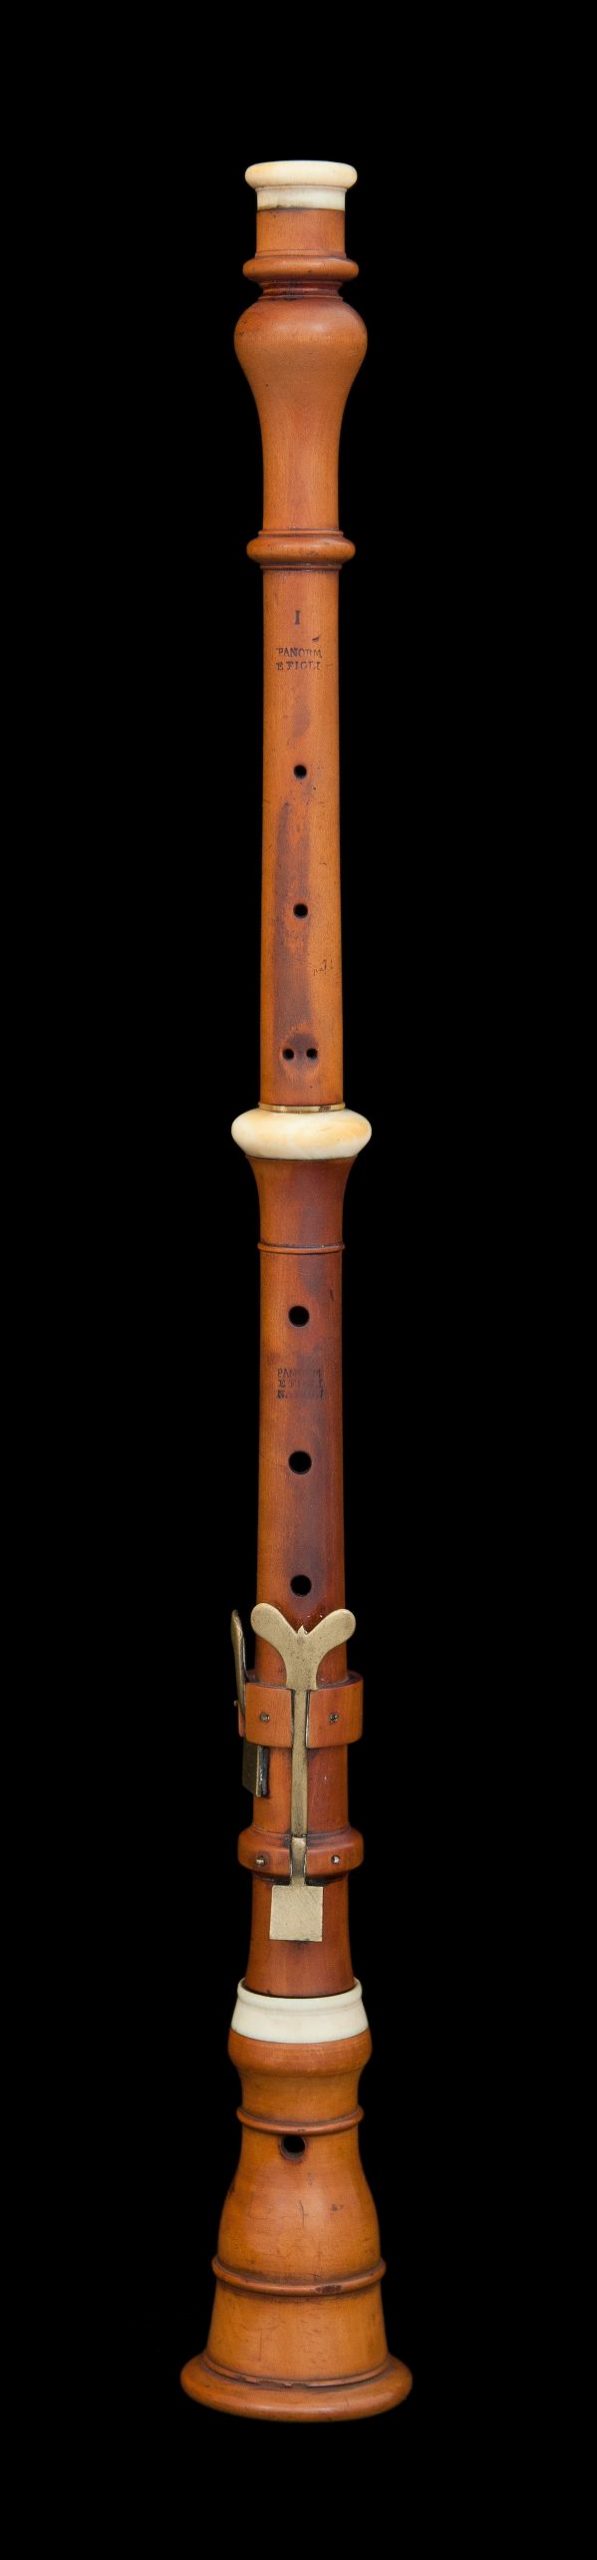 Wood and ivory instrument with finger holes. In the bagpipe family.